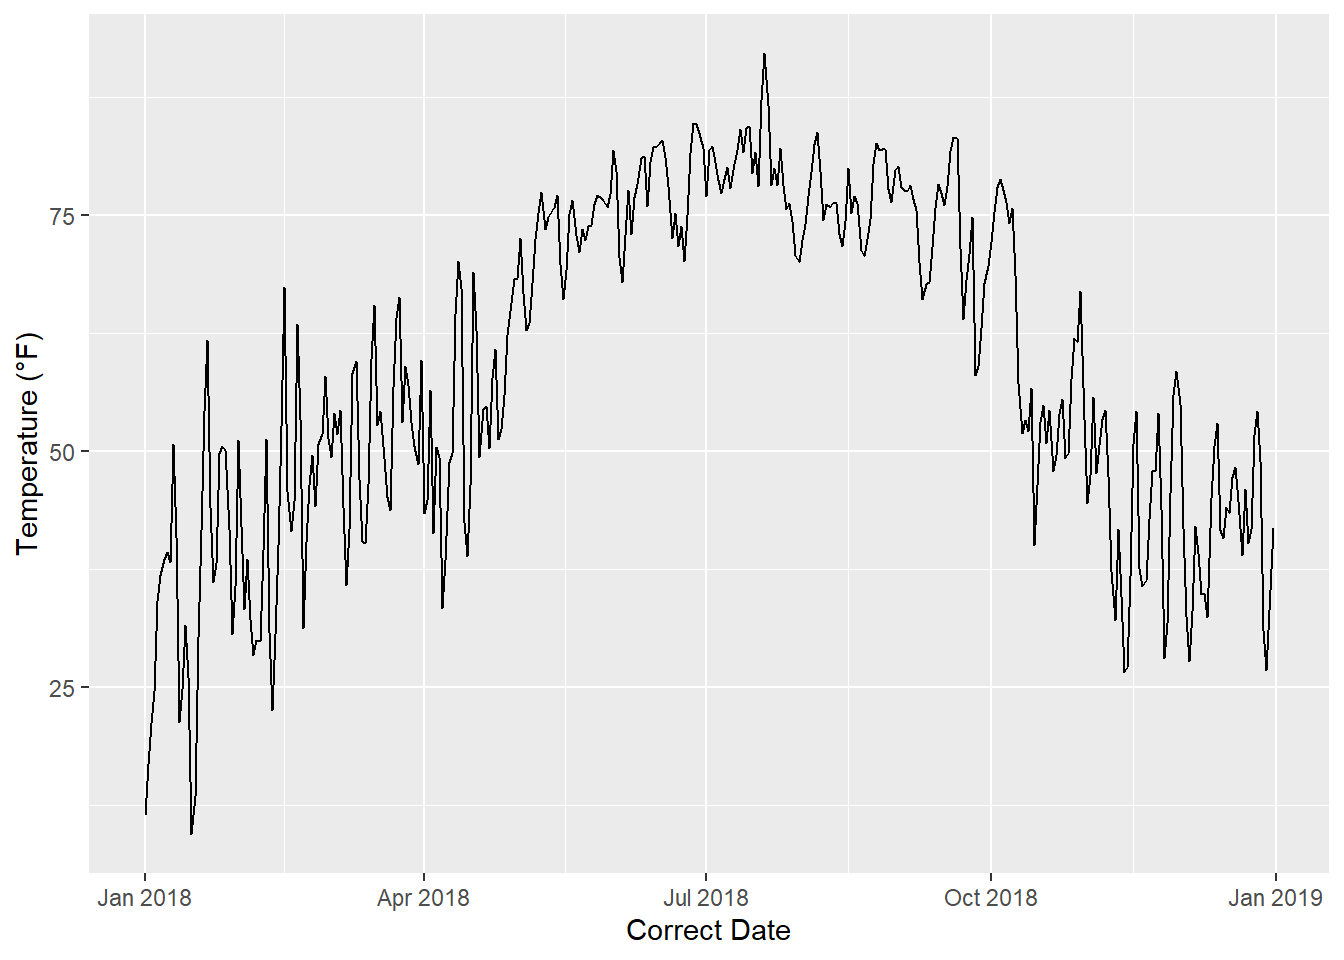 Time series plot with dates on the x-axis.